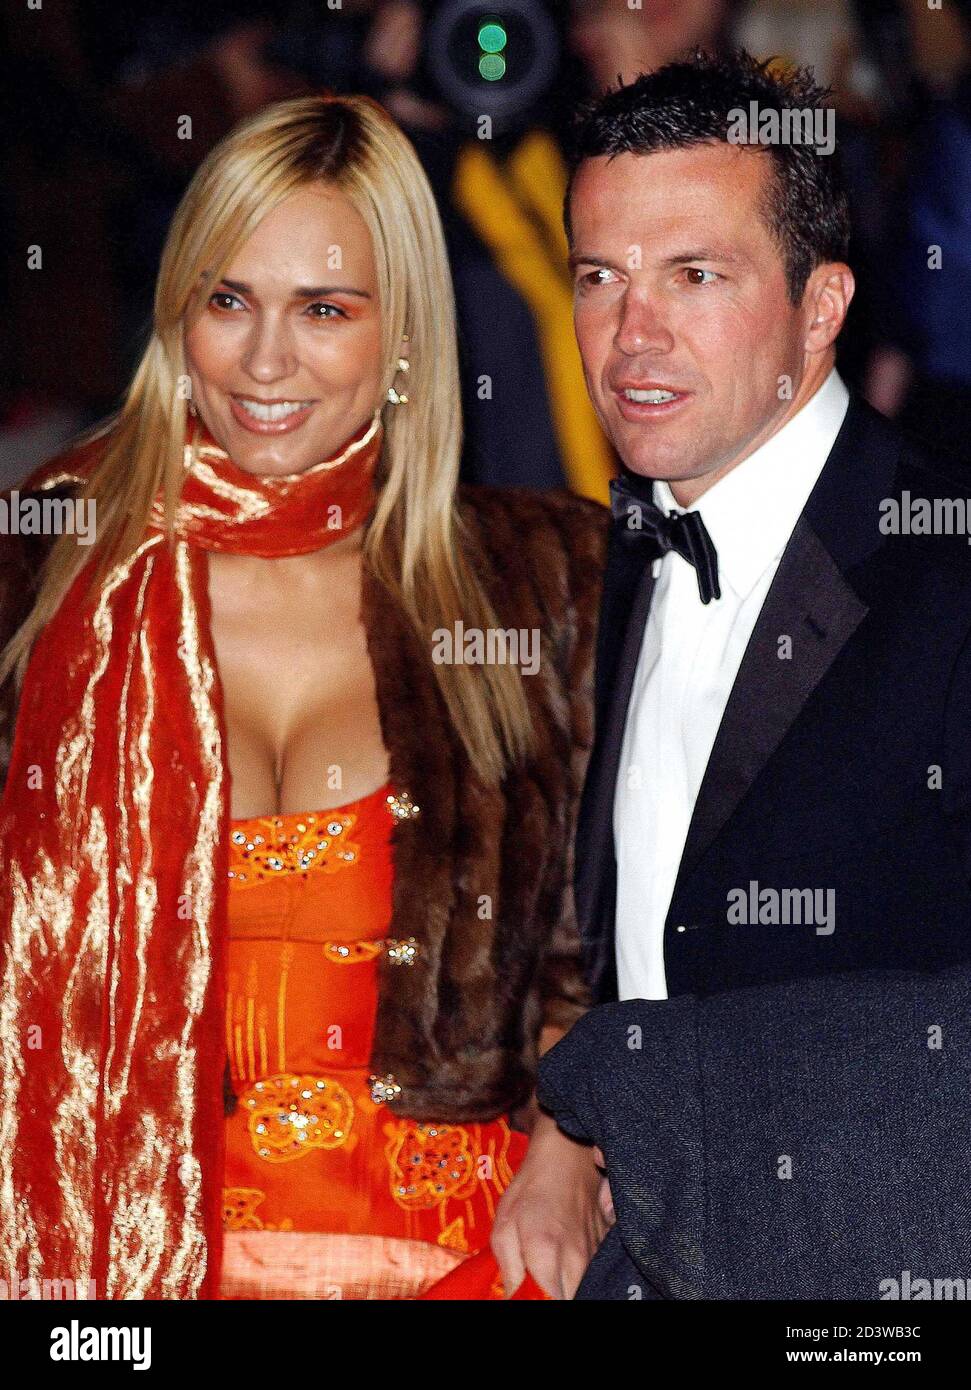 German footballer Lothar Matthaeus and his unidentified partner arrive at  the Natural History museum, London for an award ceremony to celebrate the  FIFA 100 top football players, March 4, 2004. Brazilian striker